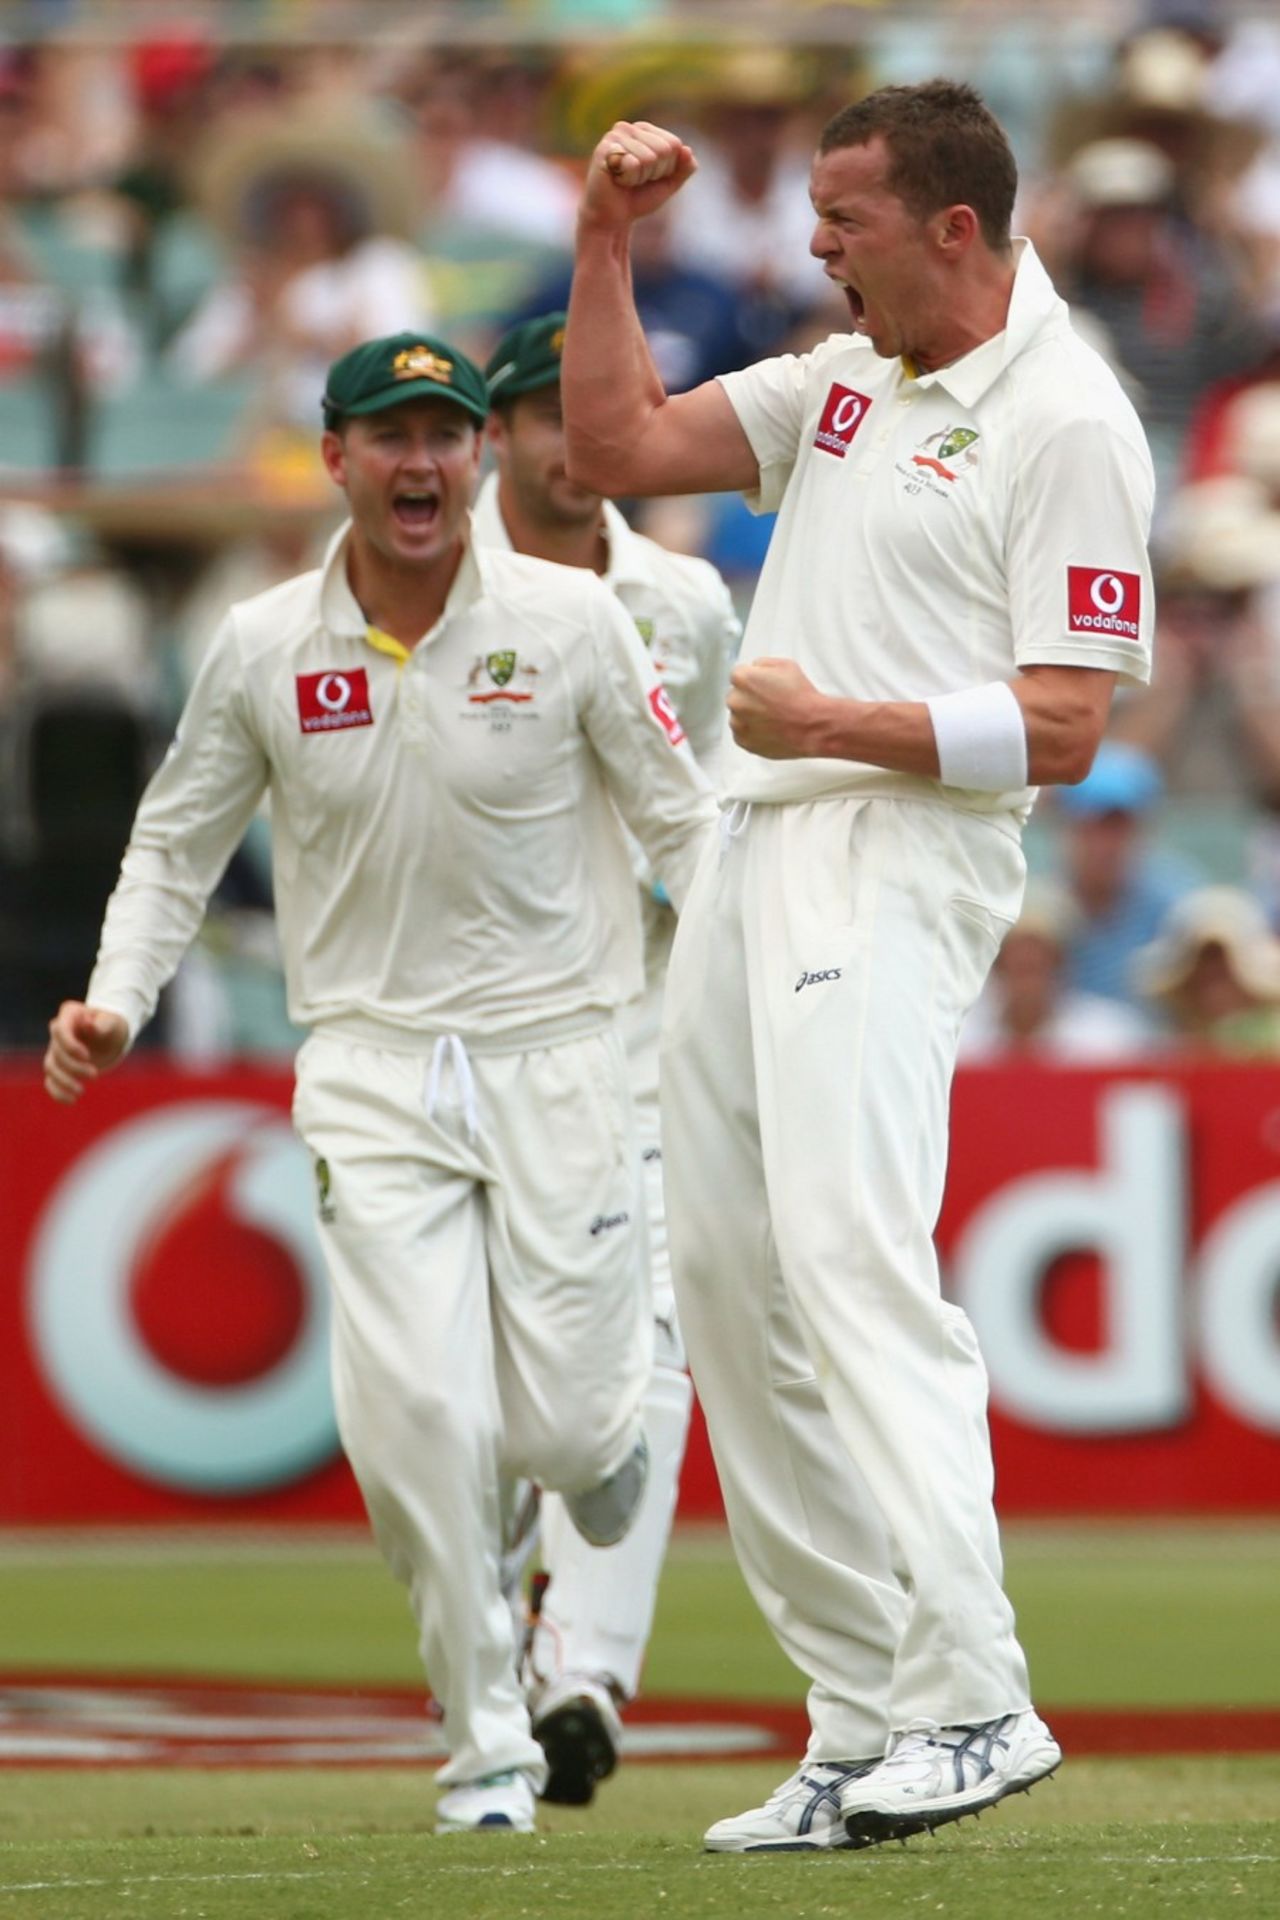 Peter Siddle celebrates a wicket, Australia v South Africa, 2nd Test, Adelaide, 3rd day, November 24, 2012